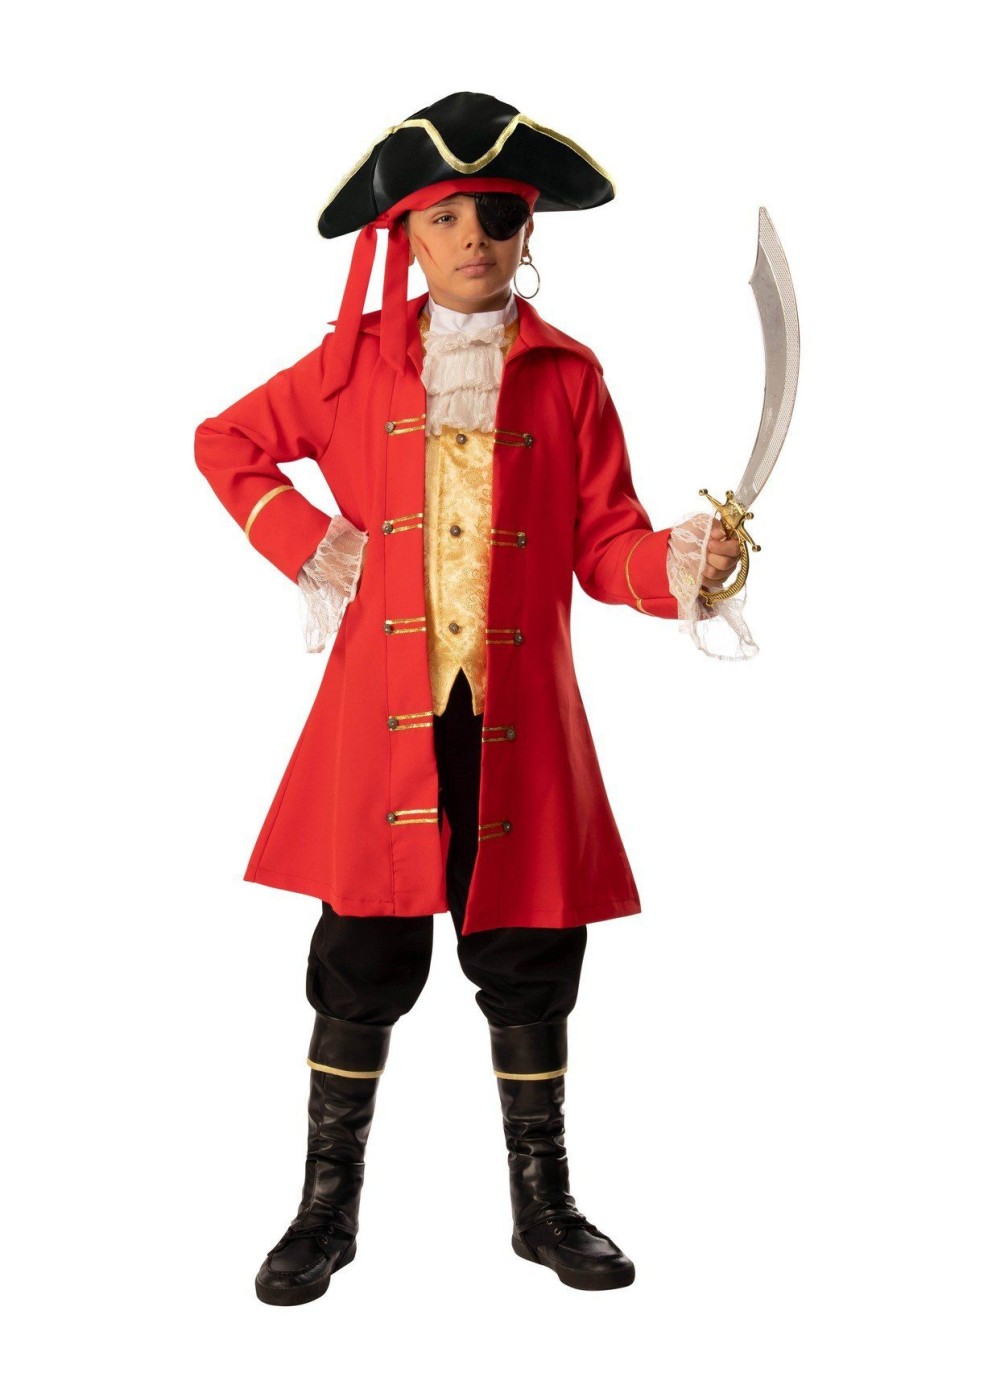 The Red Pirate Boy Costume